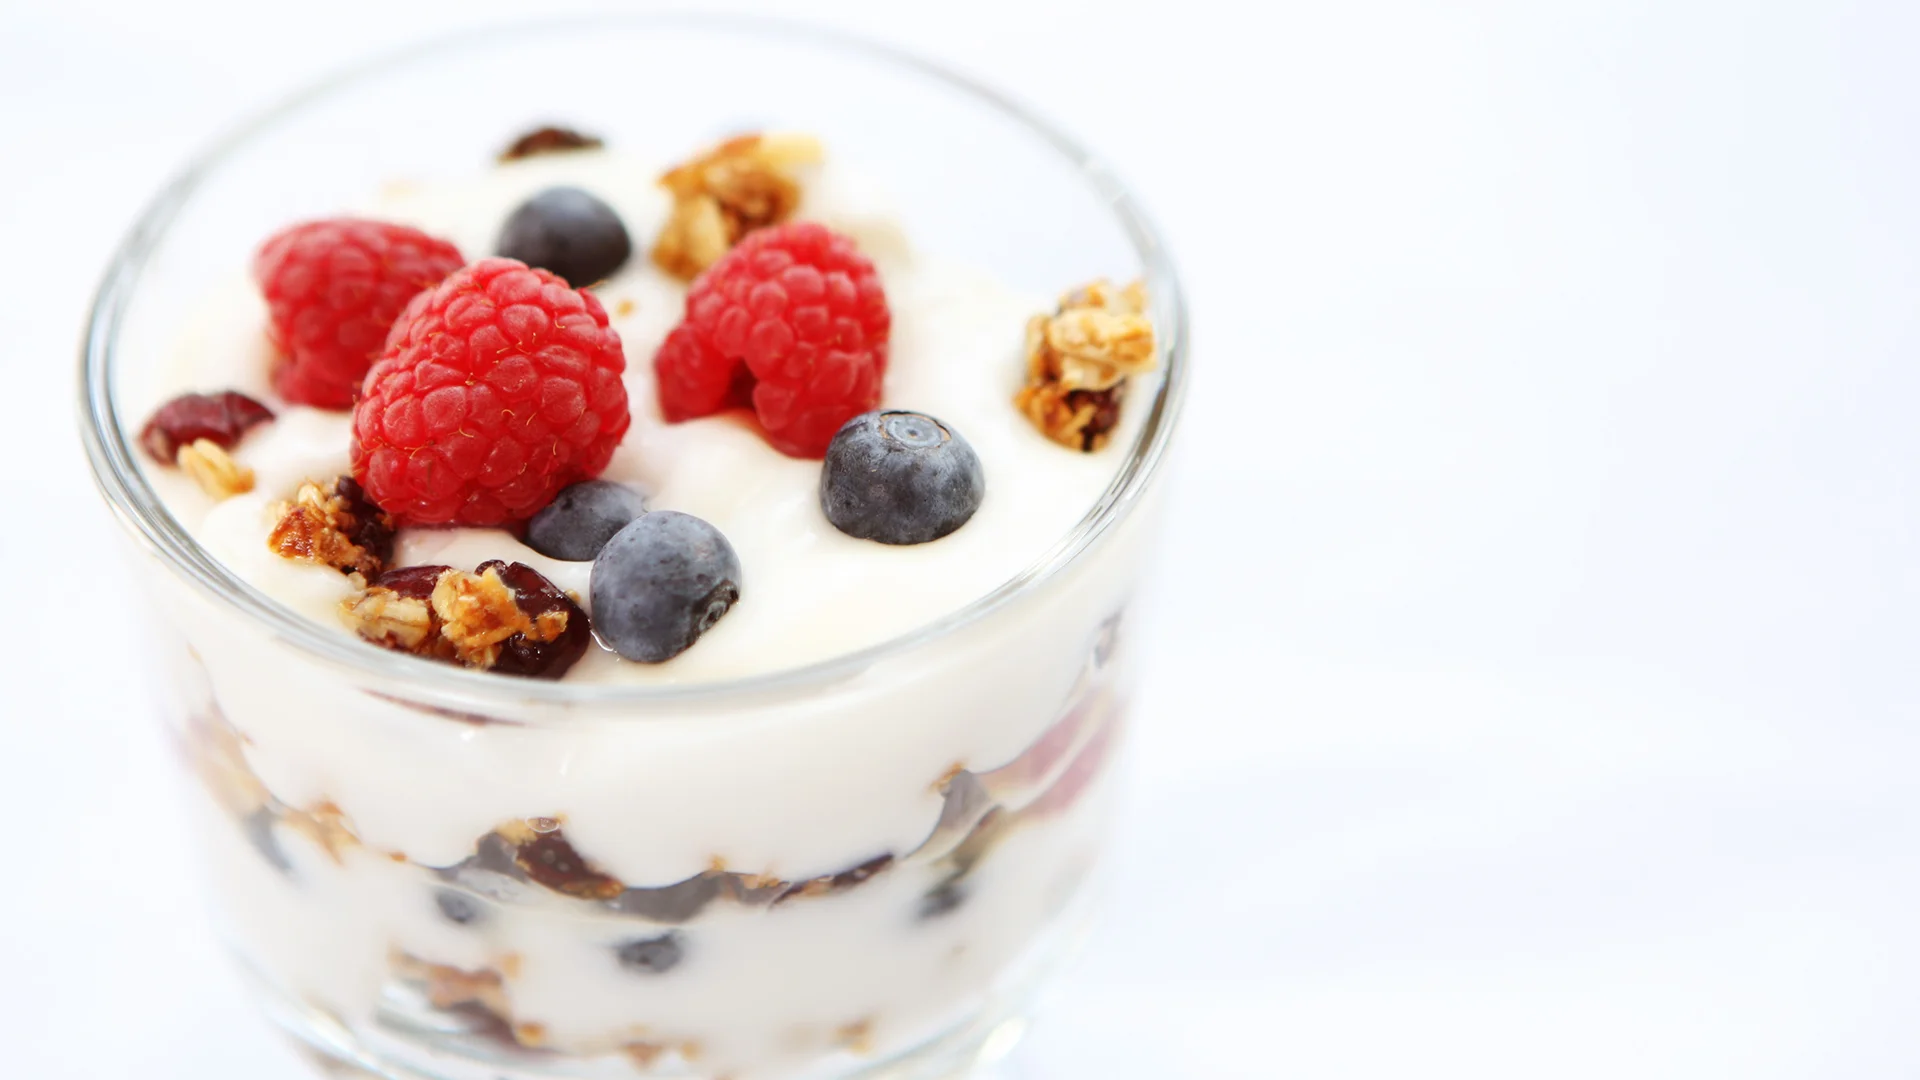 Yogurt and berries with granola in clear glass